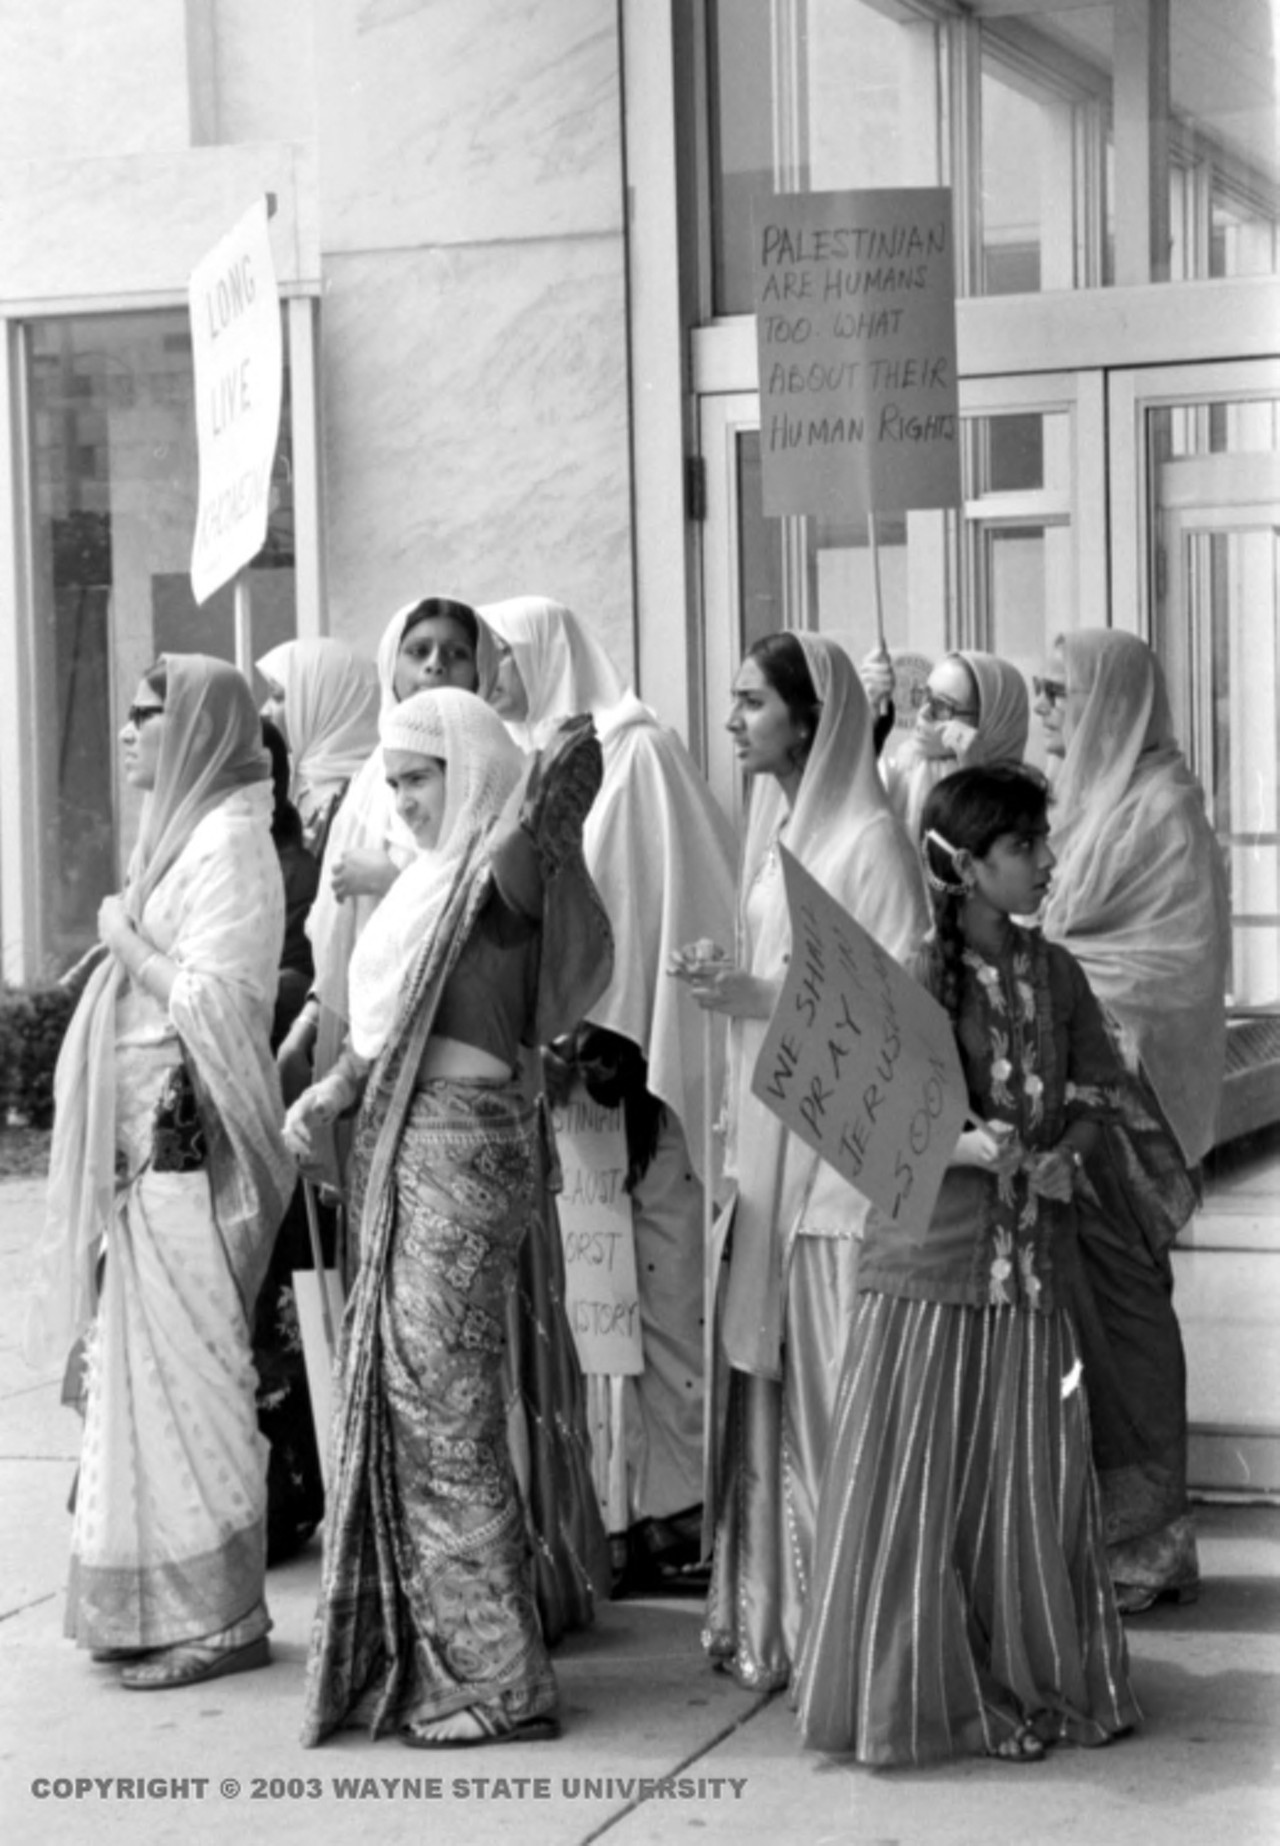 1970s | Women wearing saris and head scarves stand together holding signs, one reads, "Palestinians are human too, what about their human rights," on steps of unidentified building.